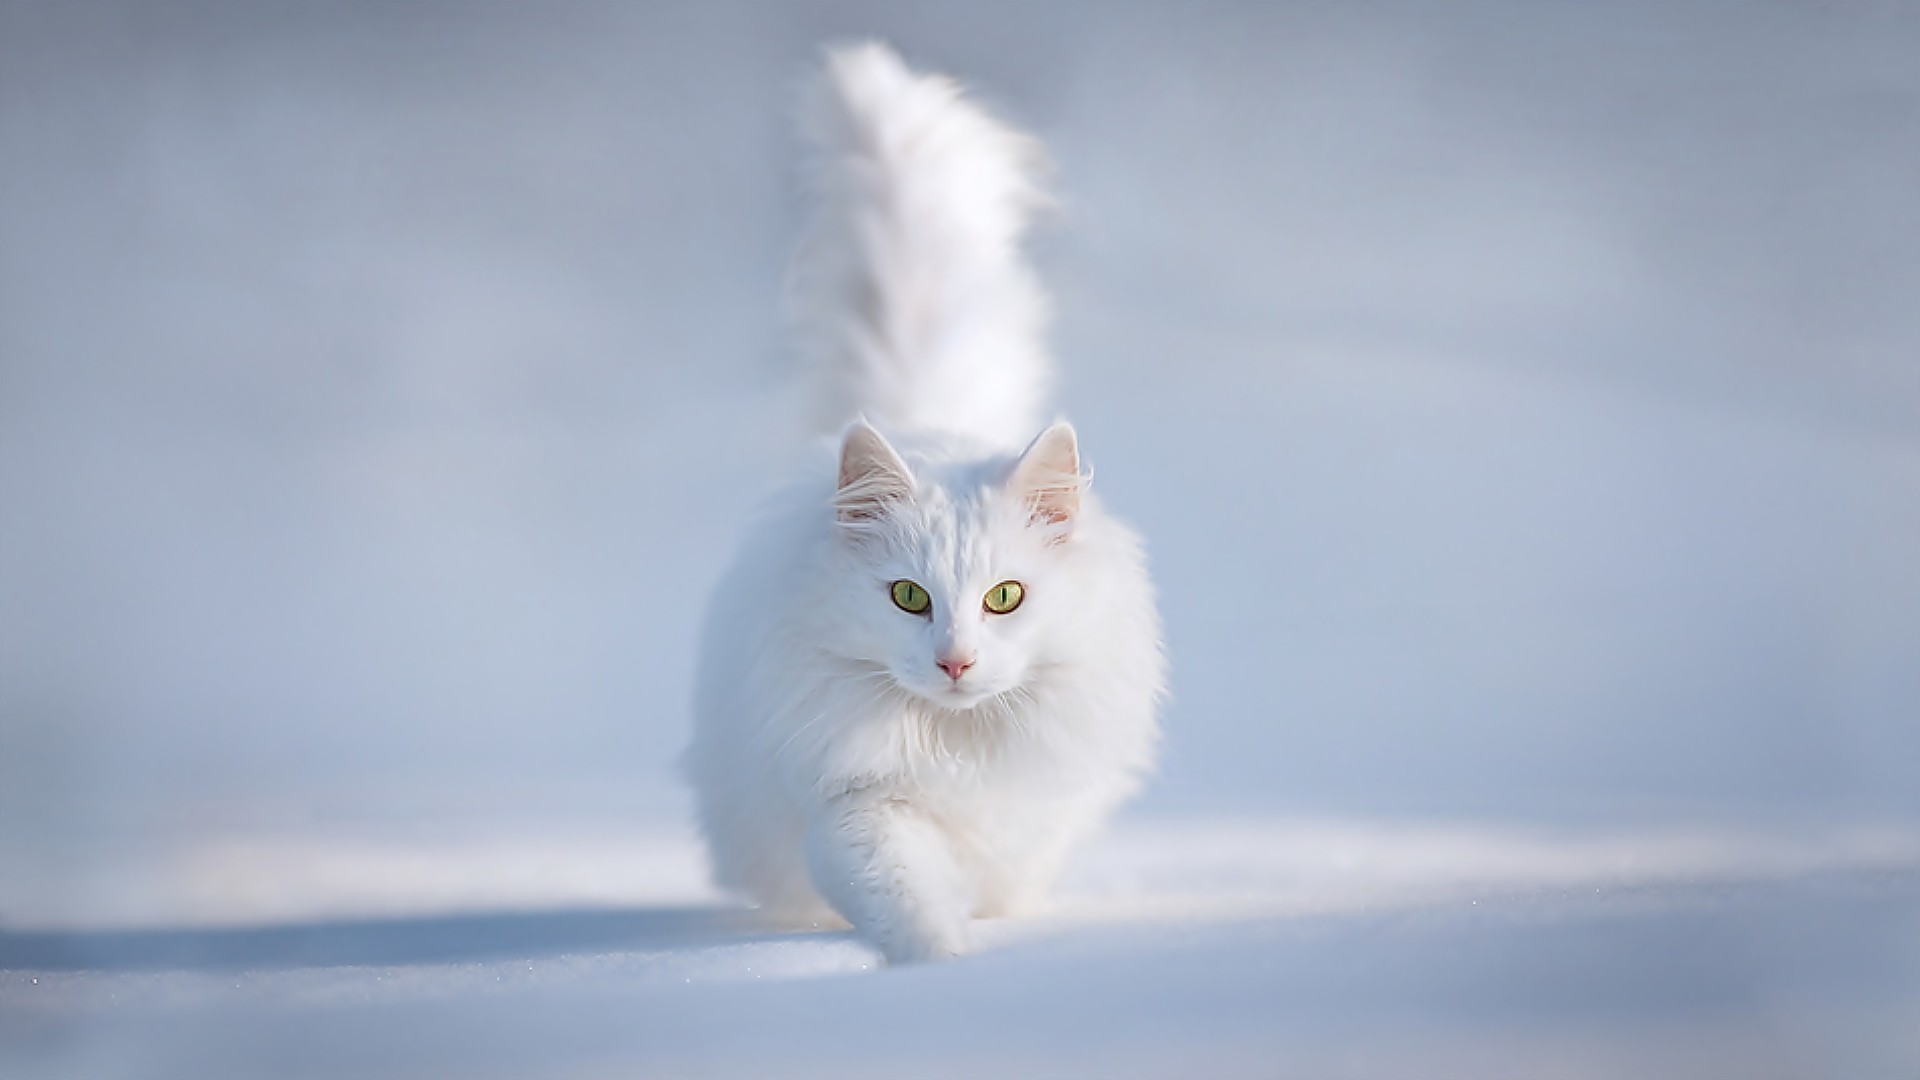  White Persian Cat In Snow Wallpaper and make this wallpaper for your